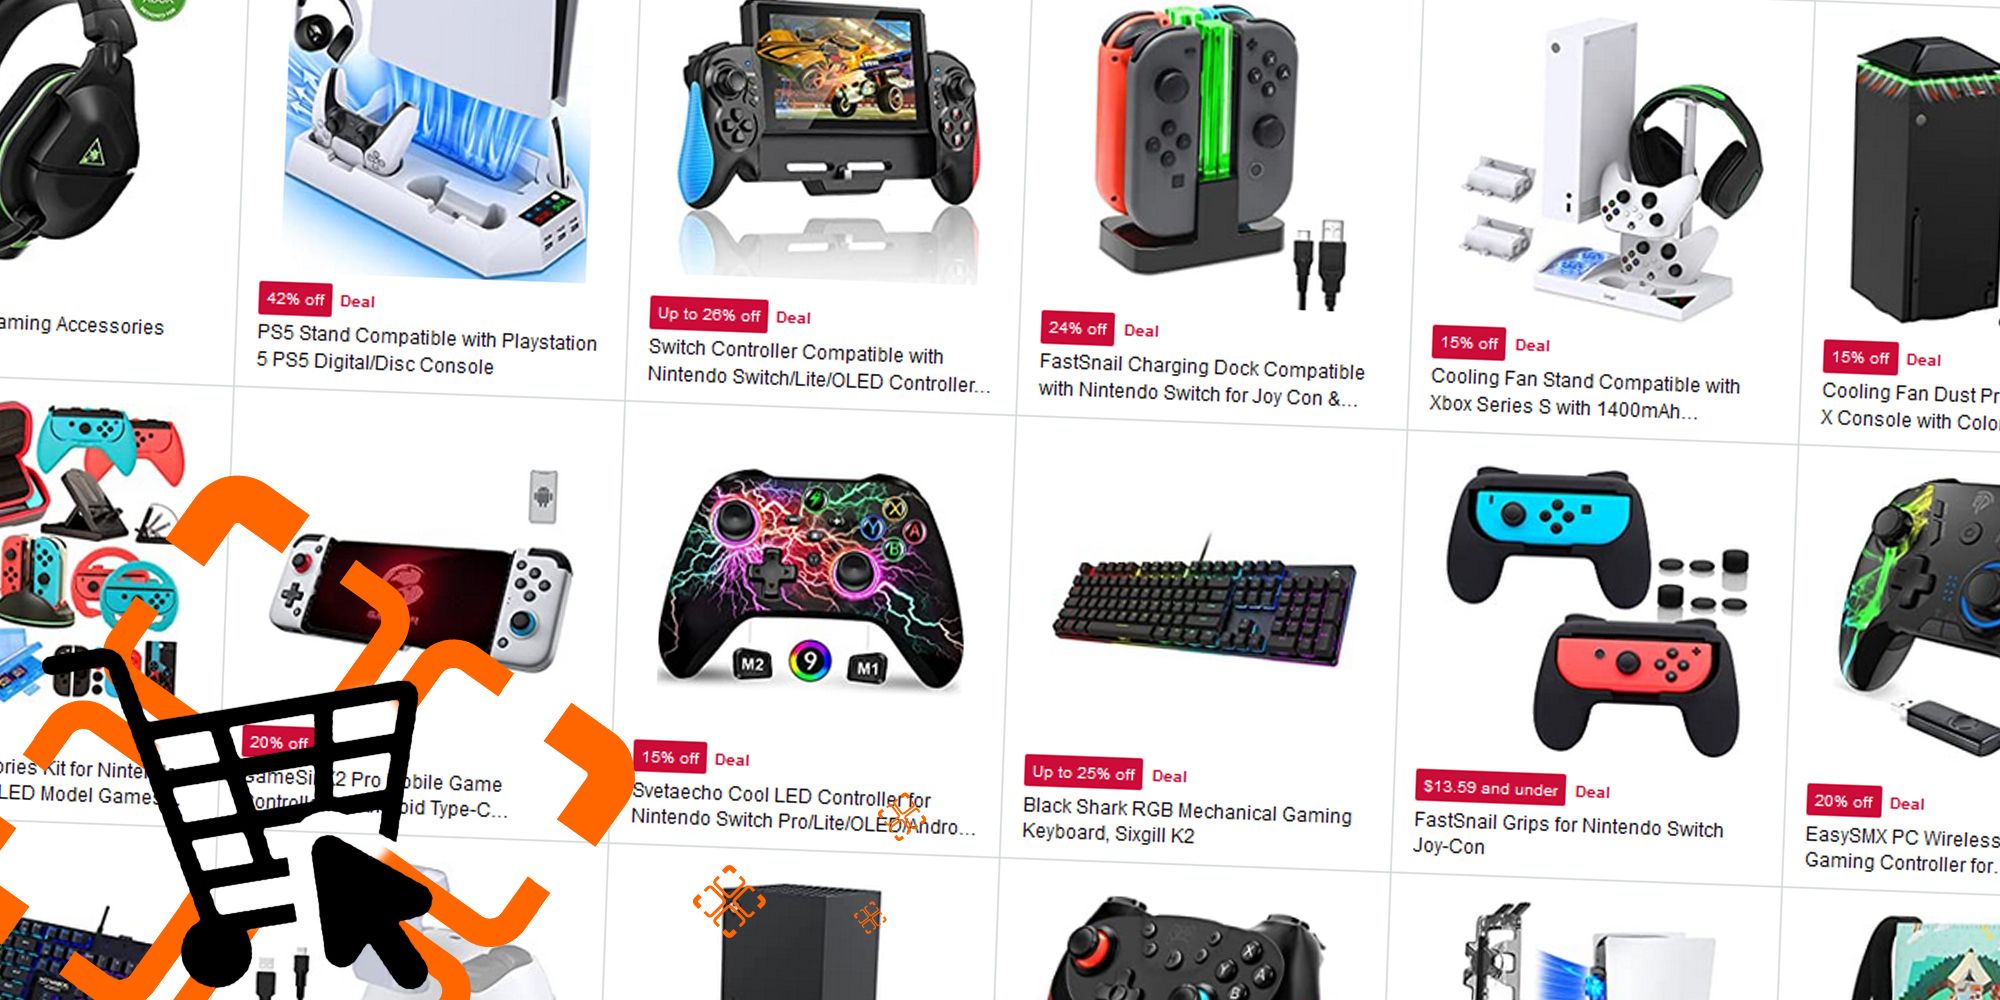 Gaming accessories discounted in the Amazon sale.